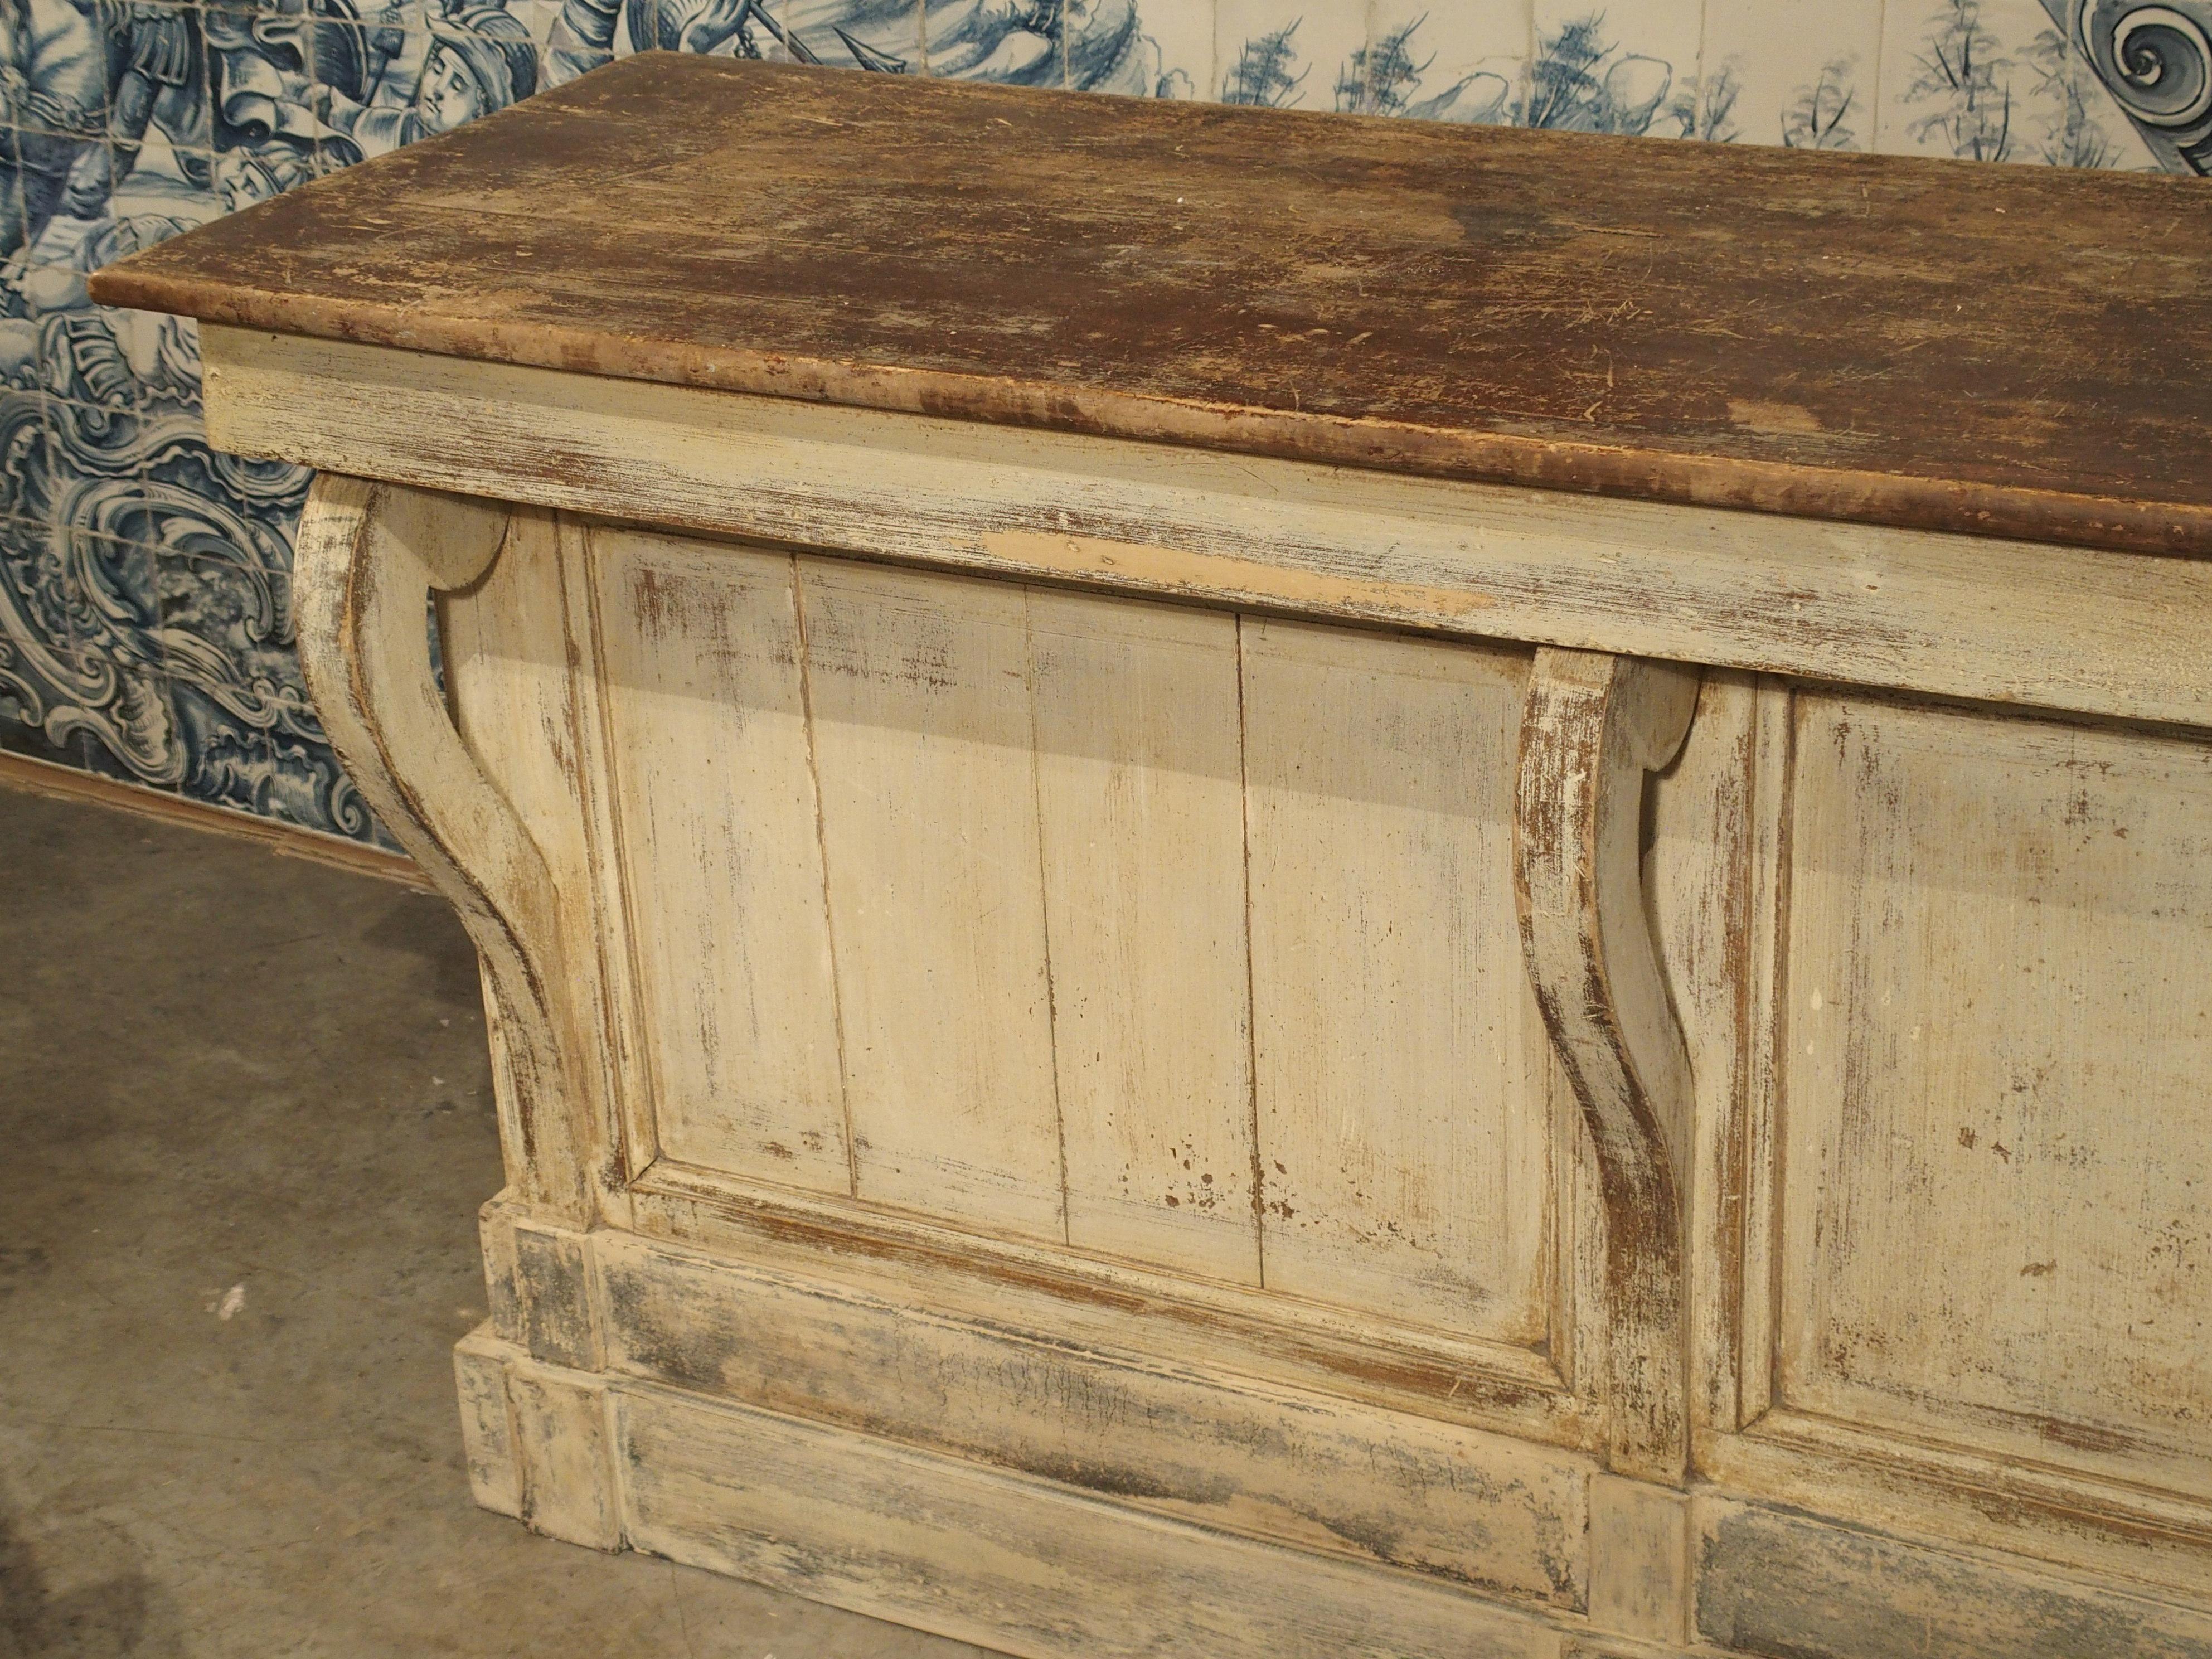 19th Century Large Antique Painted Wooden Counter or Bar from France, circa 1880